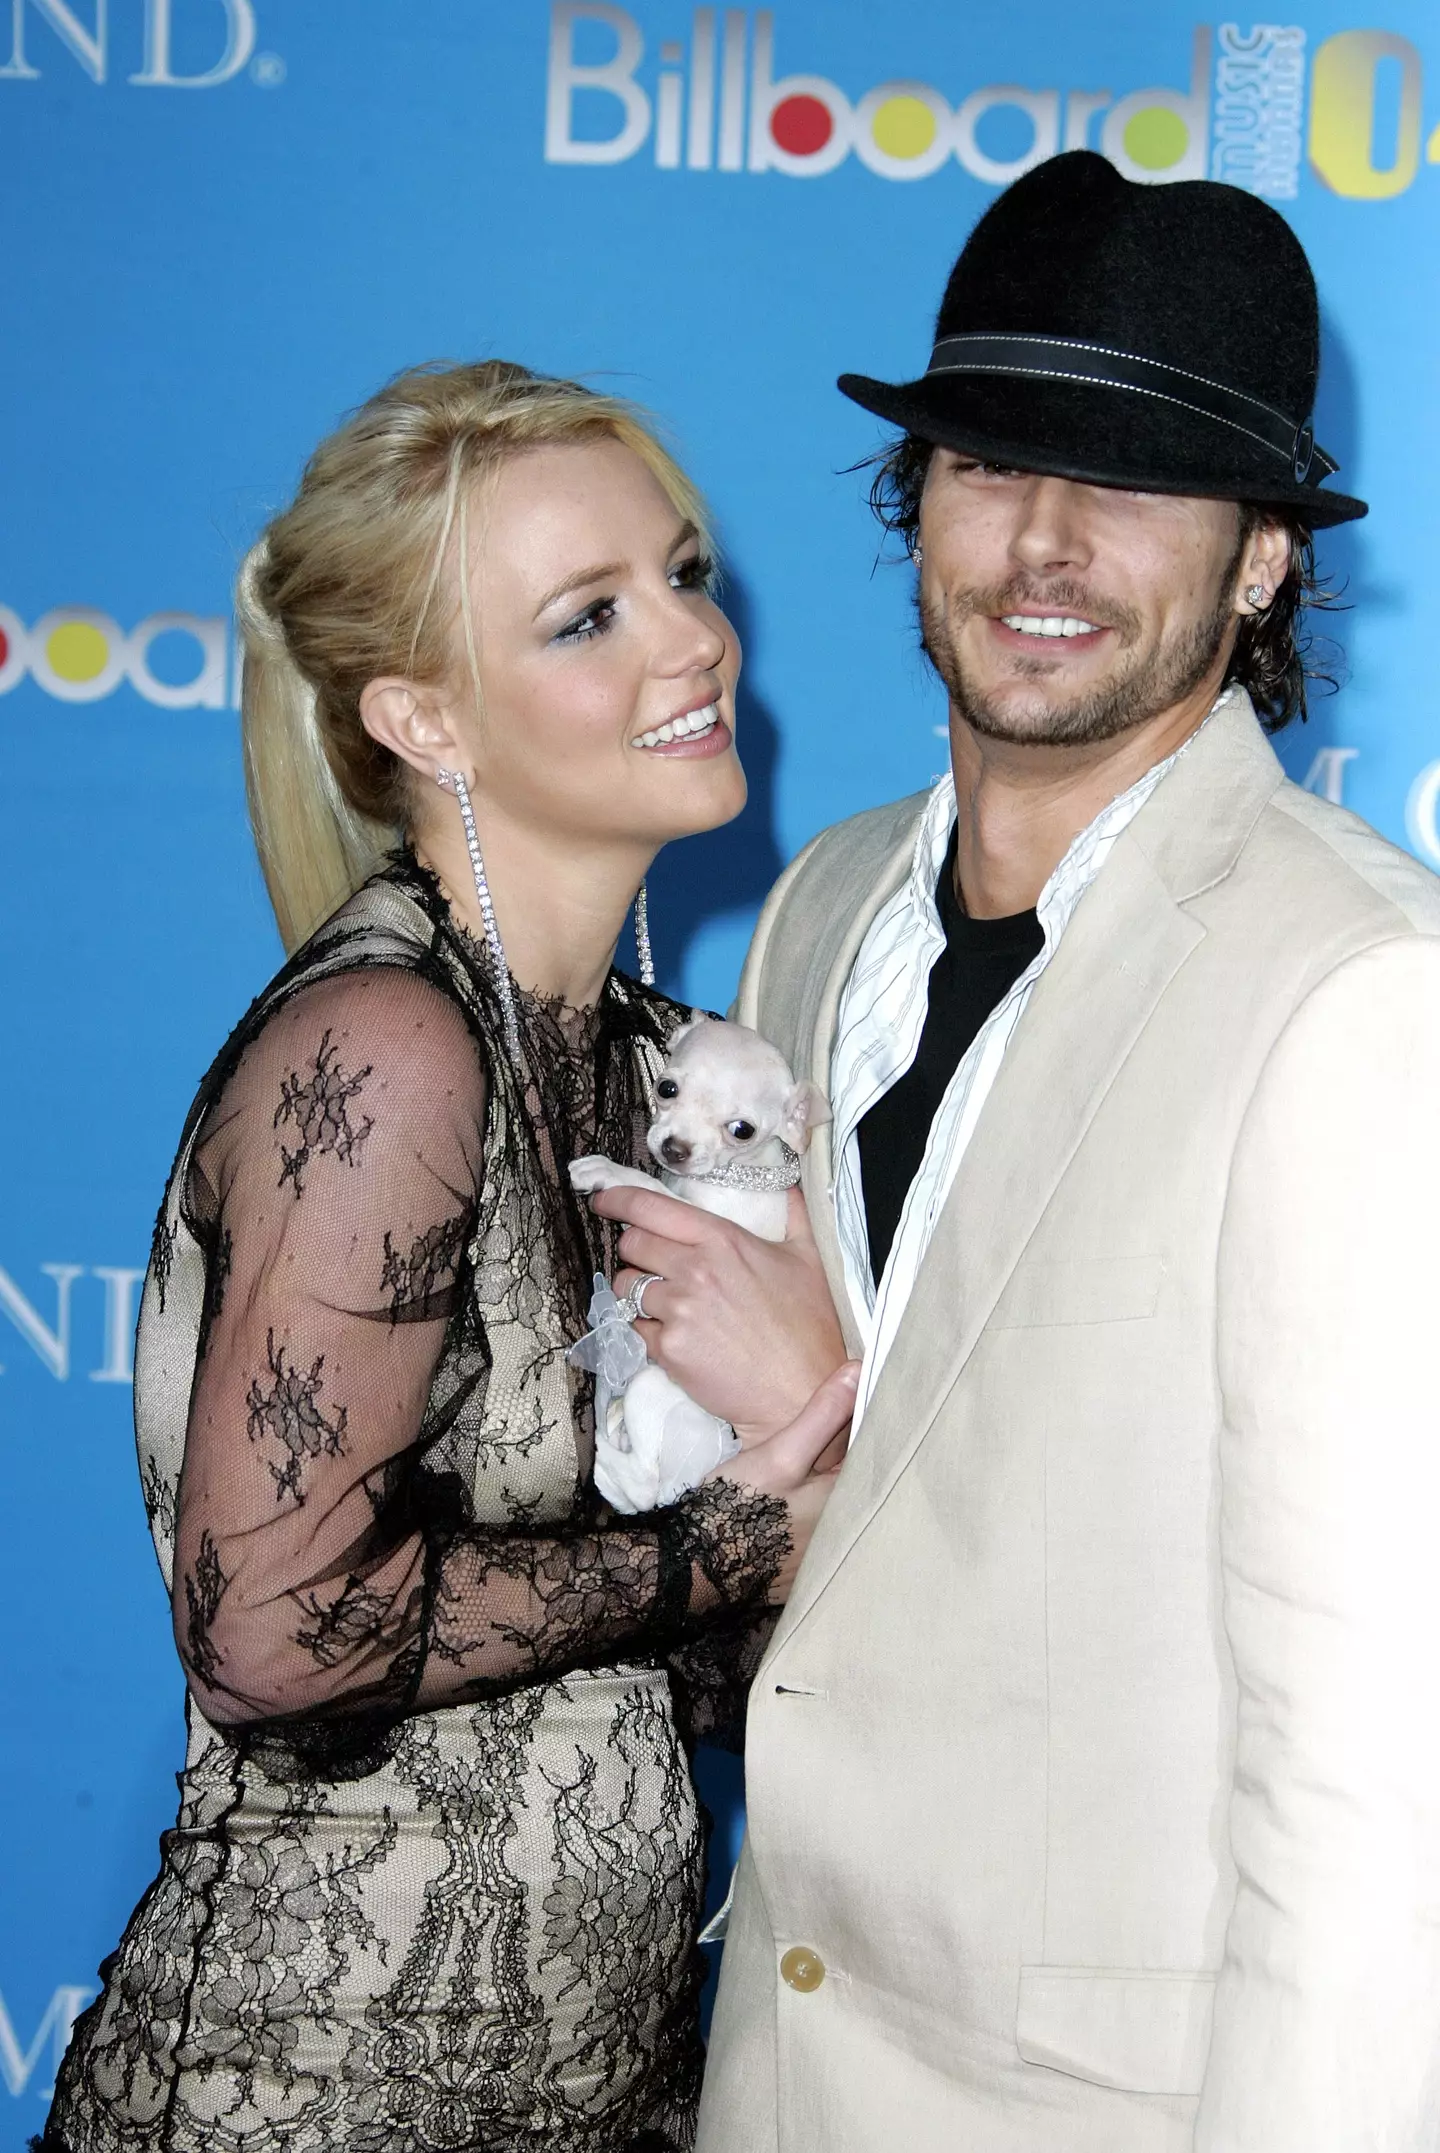 Britney and Federline were married for three years.